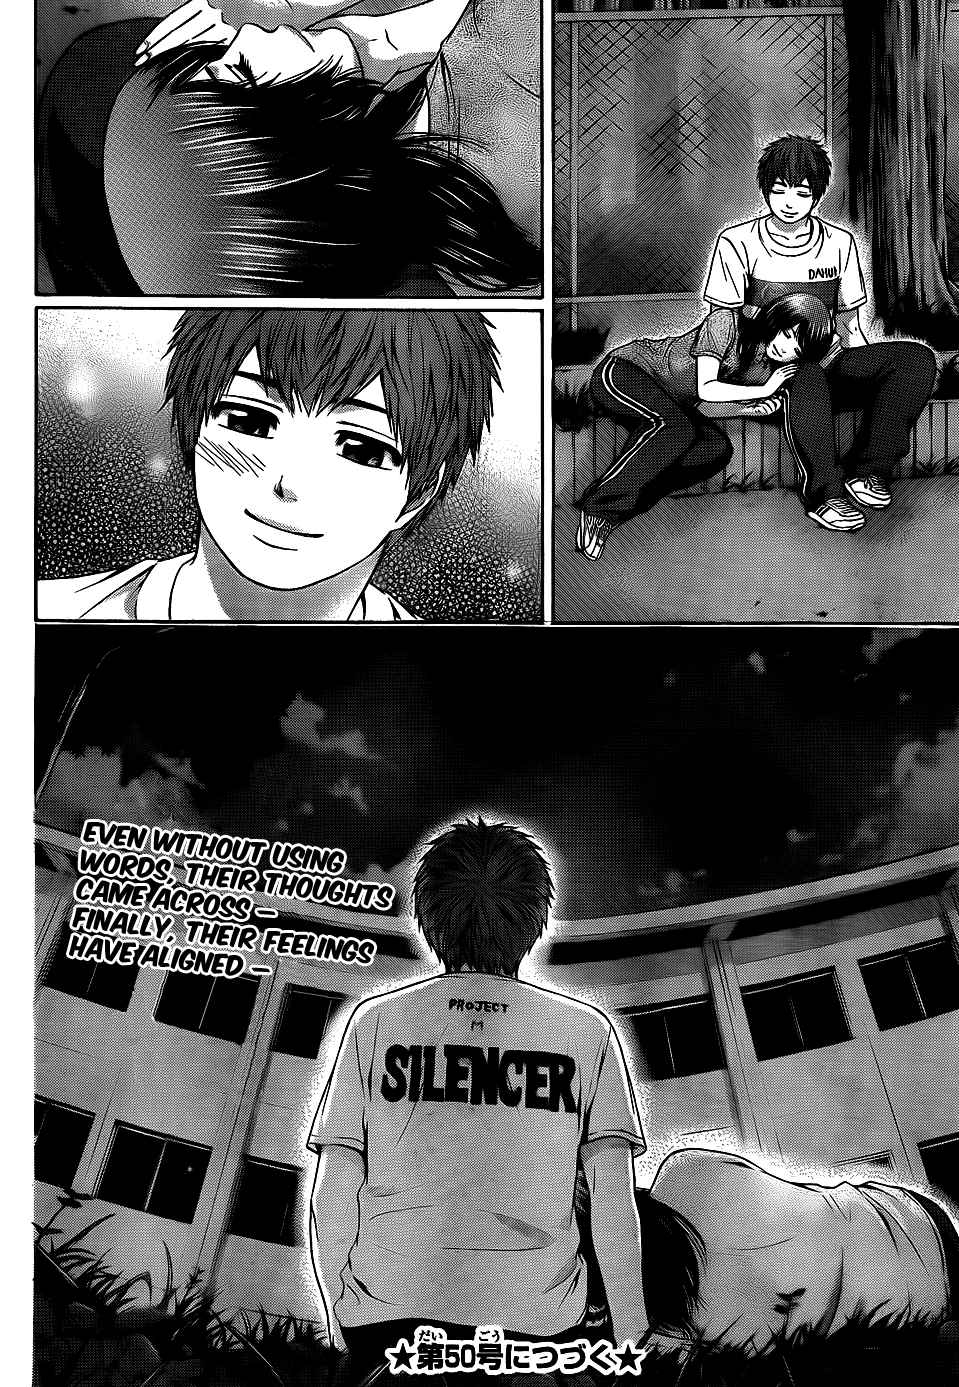 GE ~Good Ending~ Vol. 6 Ch. 58 Each Other